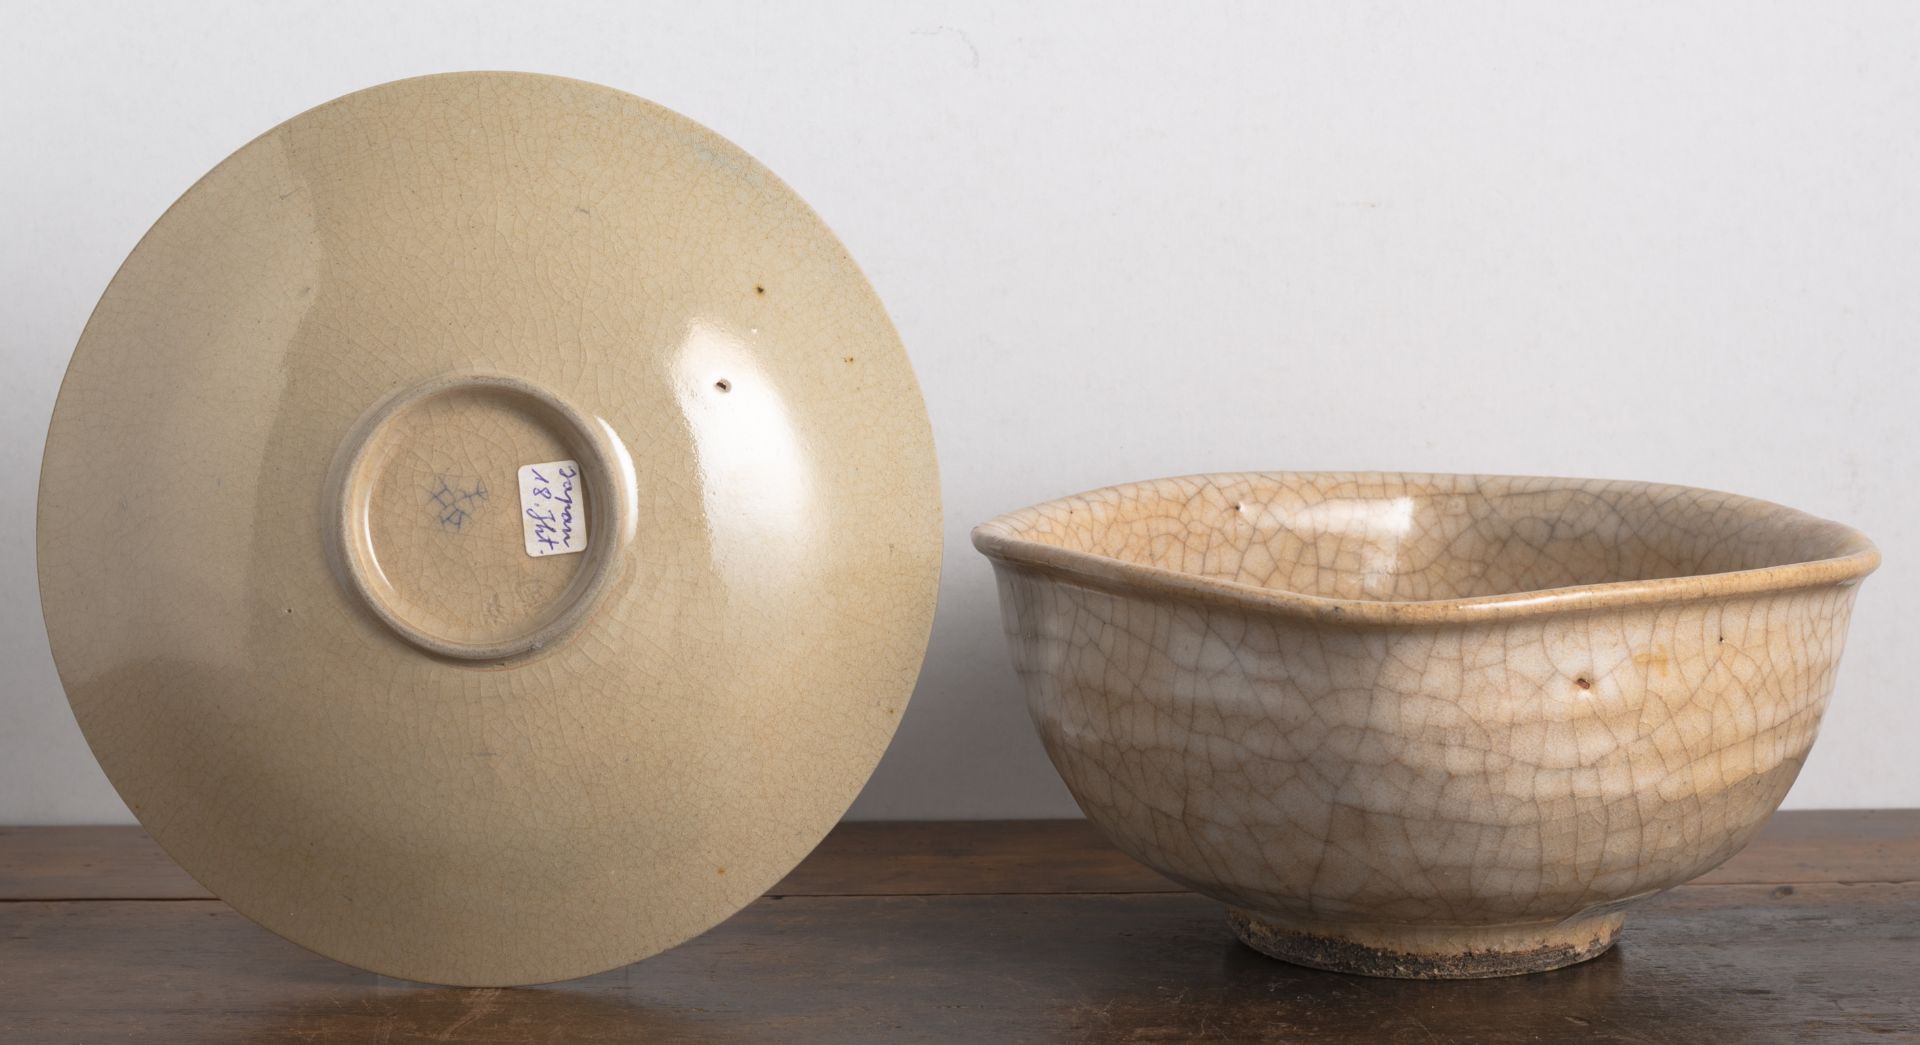 A QUASI-SQUARE CREAM-BROWN GLAZED CERAMIC BOWL AND A POLYCHROME PAINTED DISH FOR THE TEA CEREMONY - Image 2 of 4